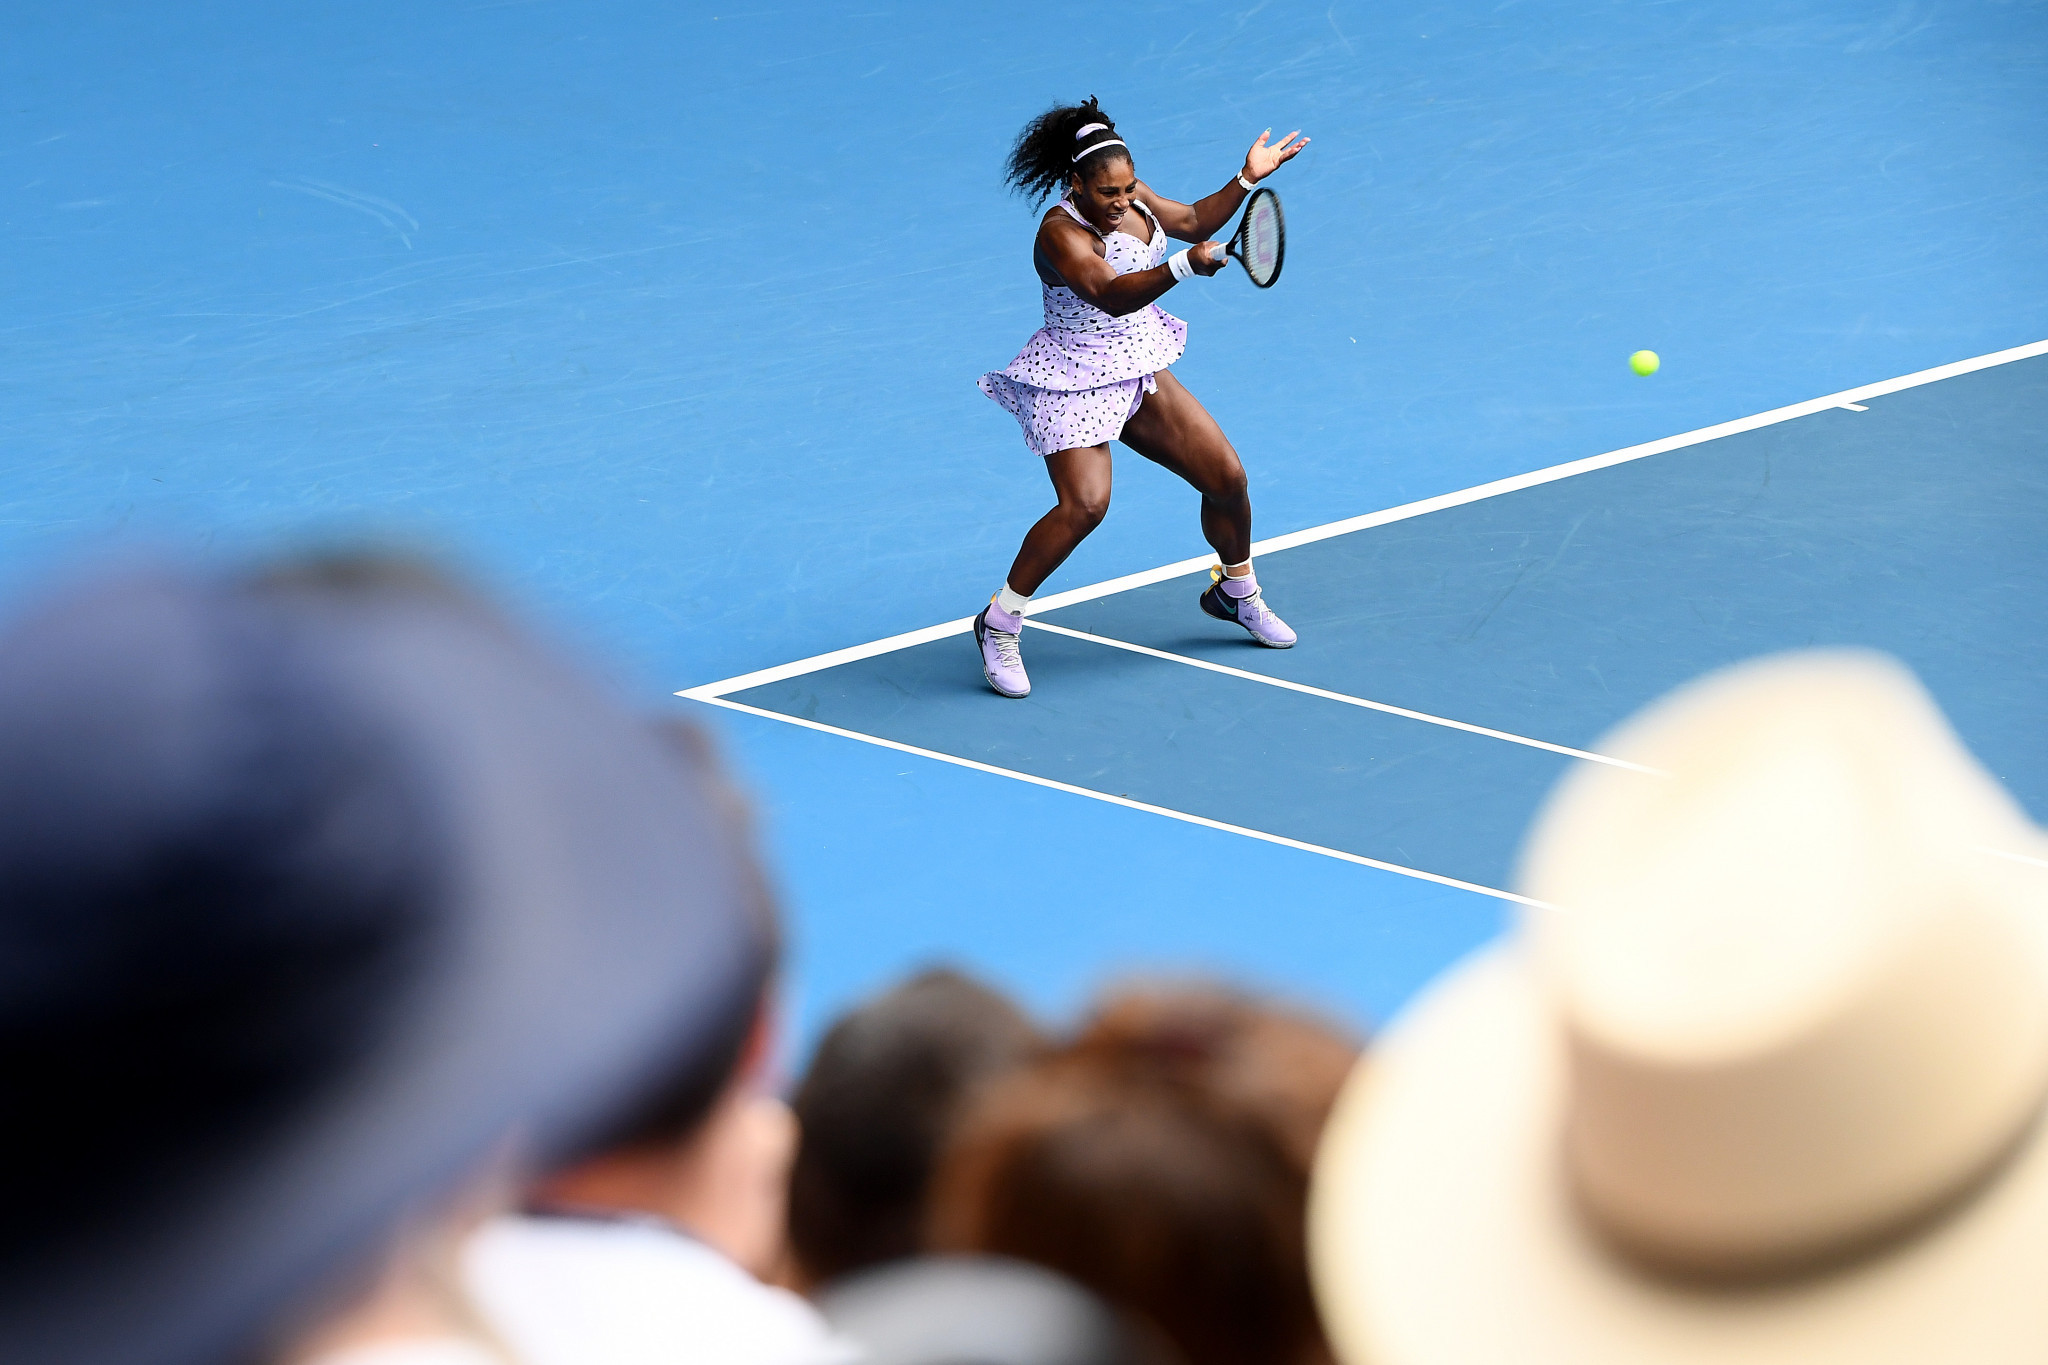 Seven-time Australian Open Serena Williams was also in action ©Getty Images